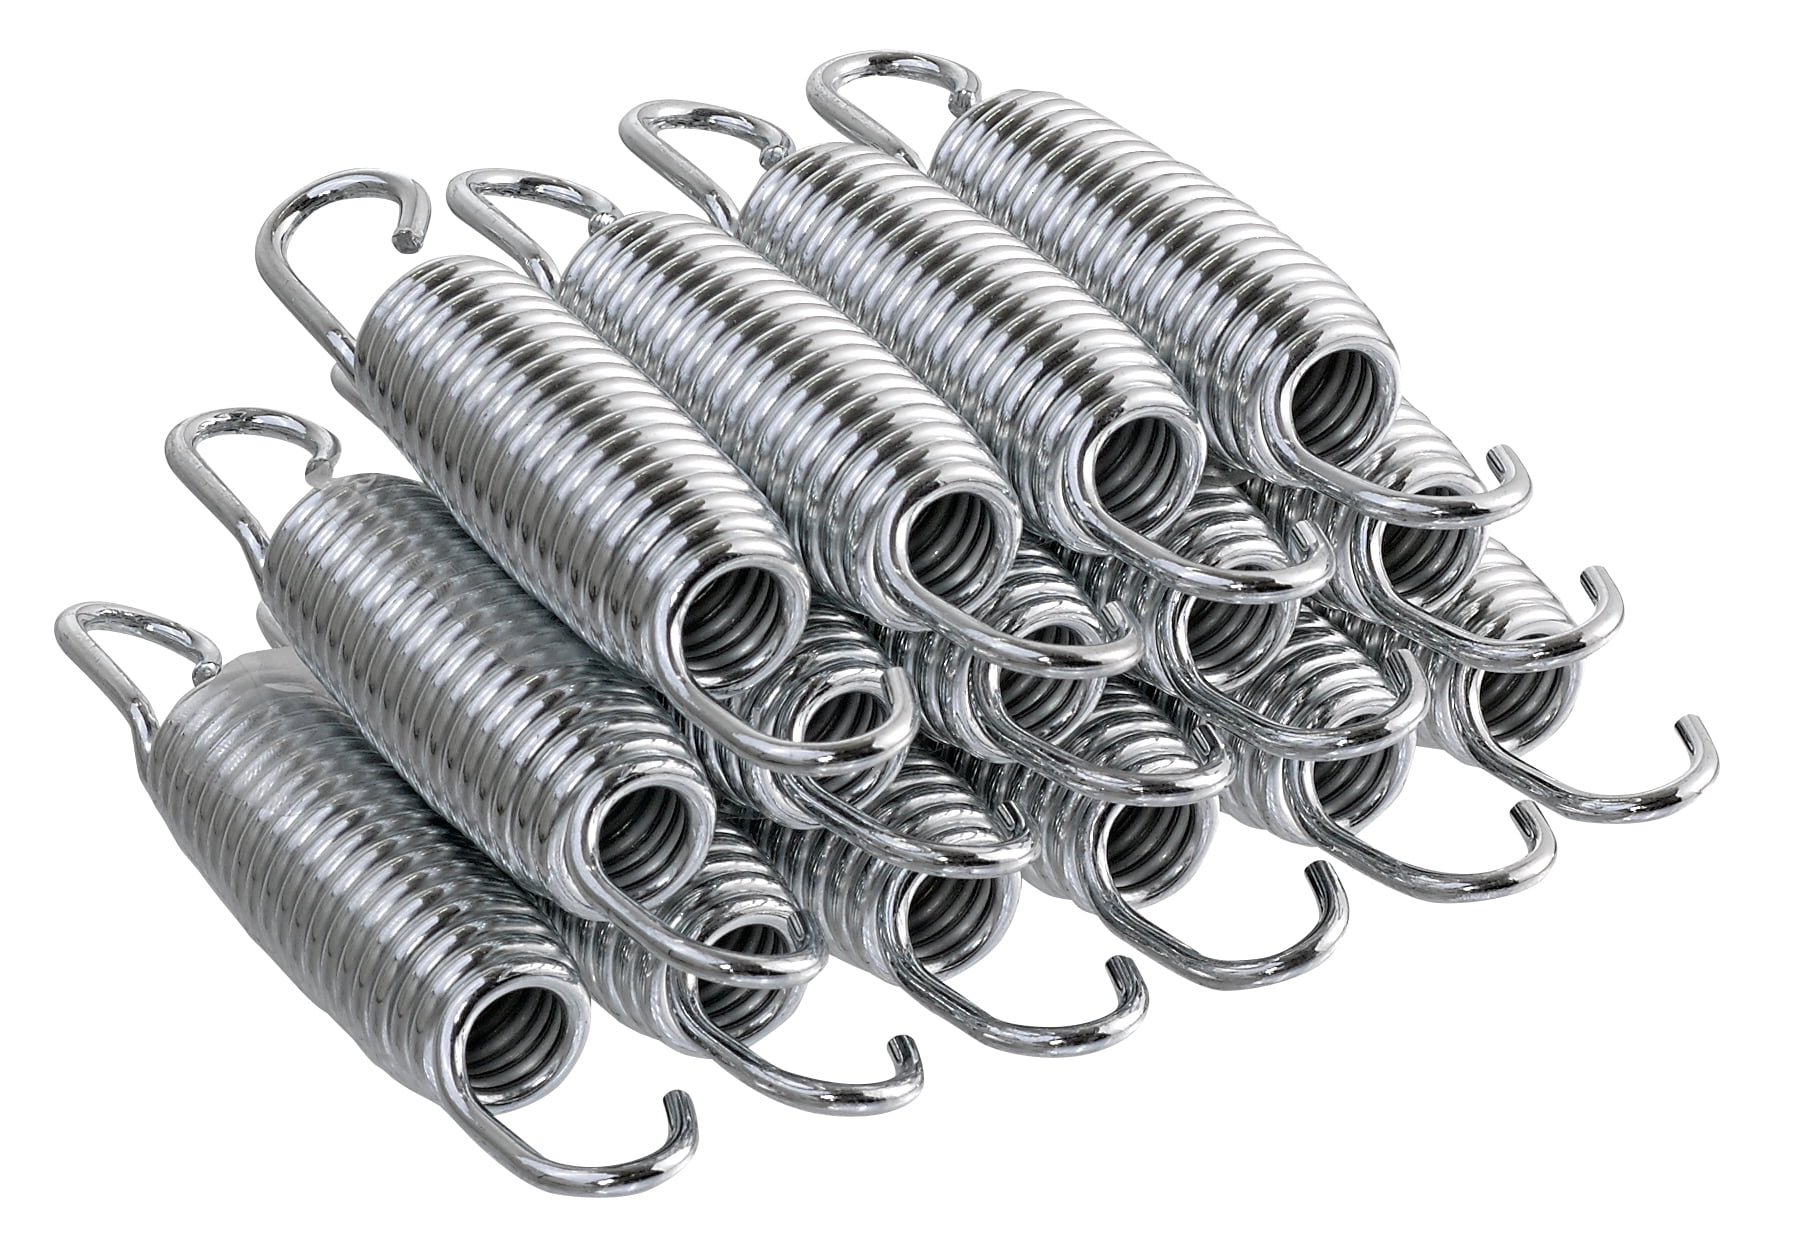 90pcs Heavy Duty Trampoline Springs 5.5 Inch Galvanized Steel Replacement Set 